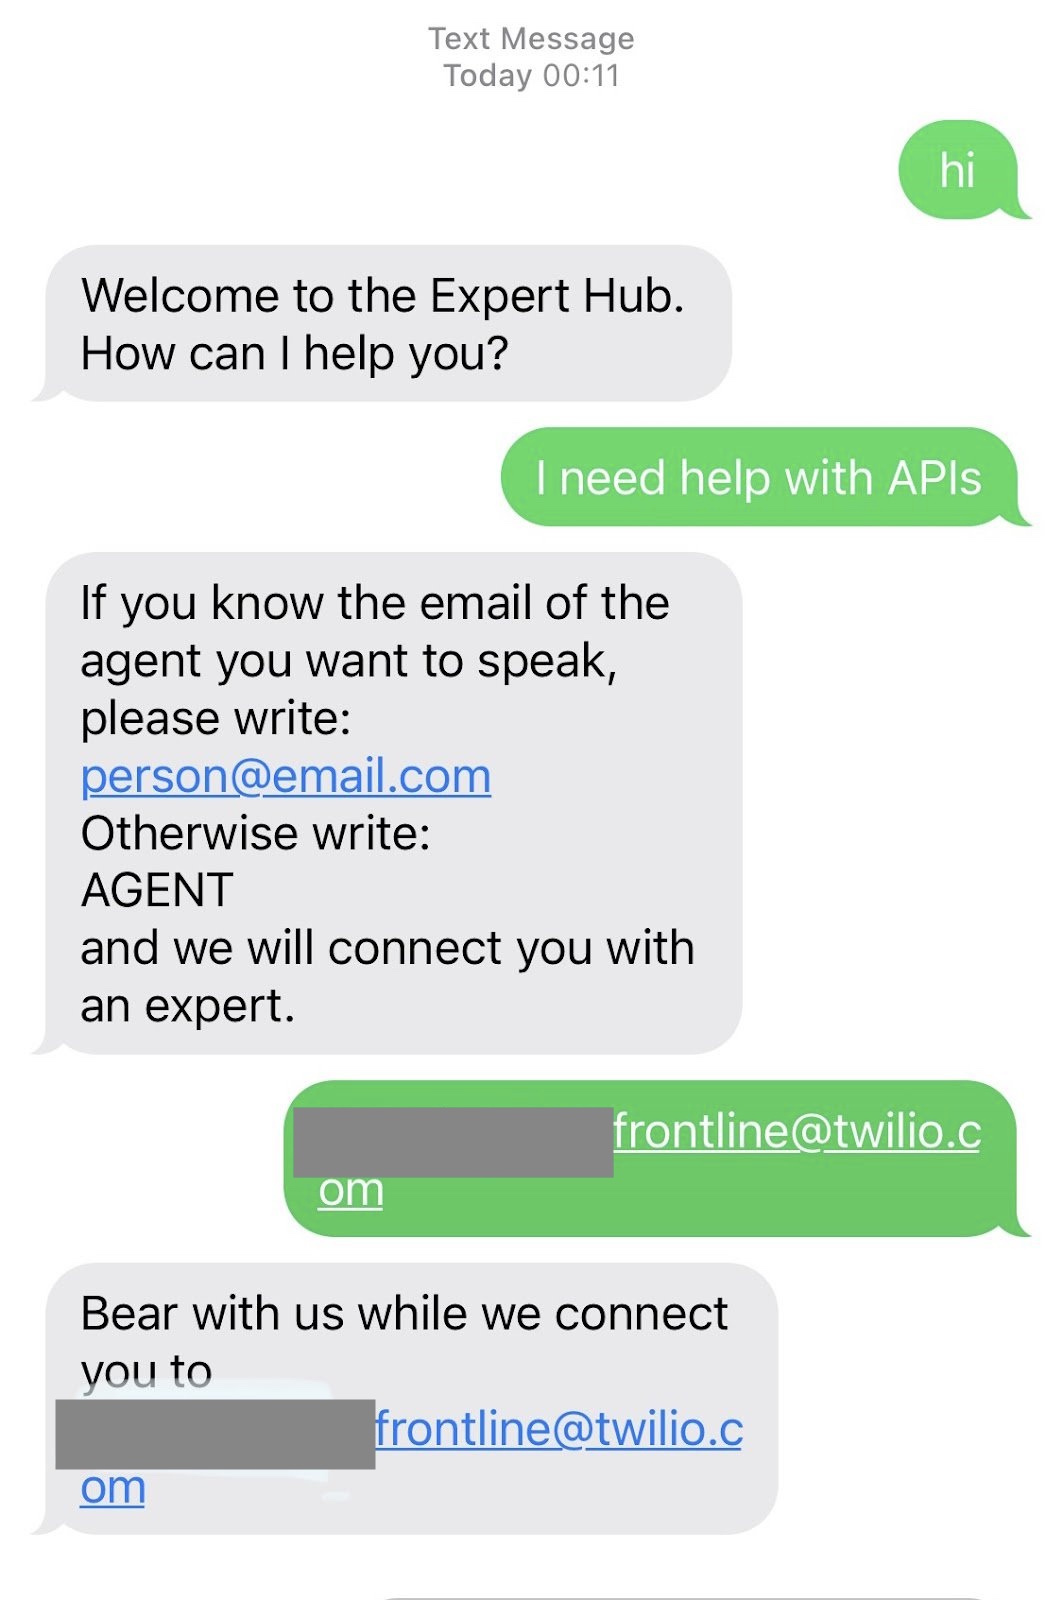 Connecting a bot to an expert